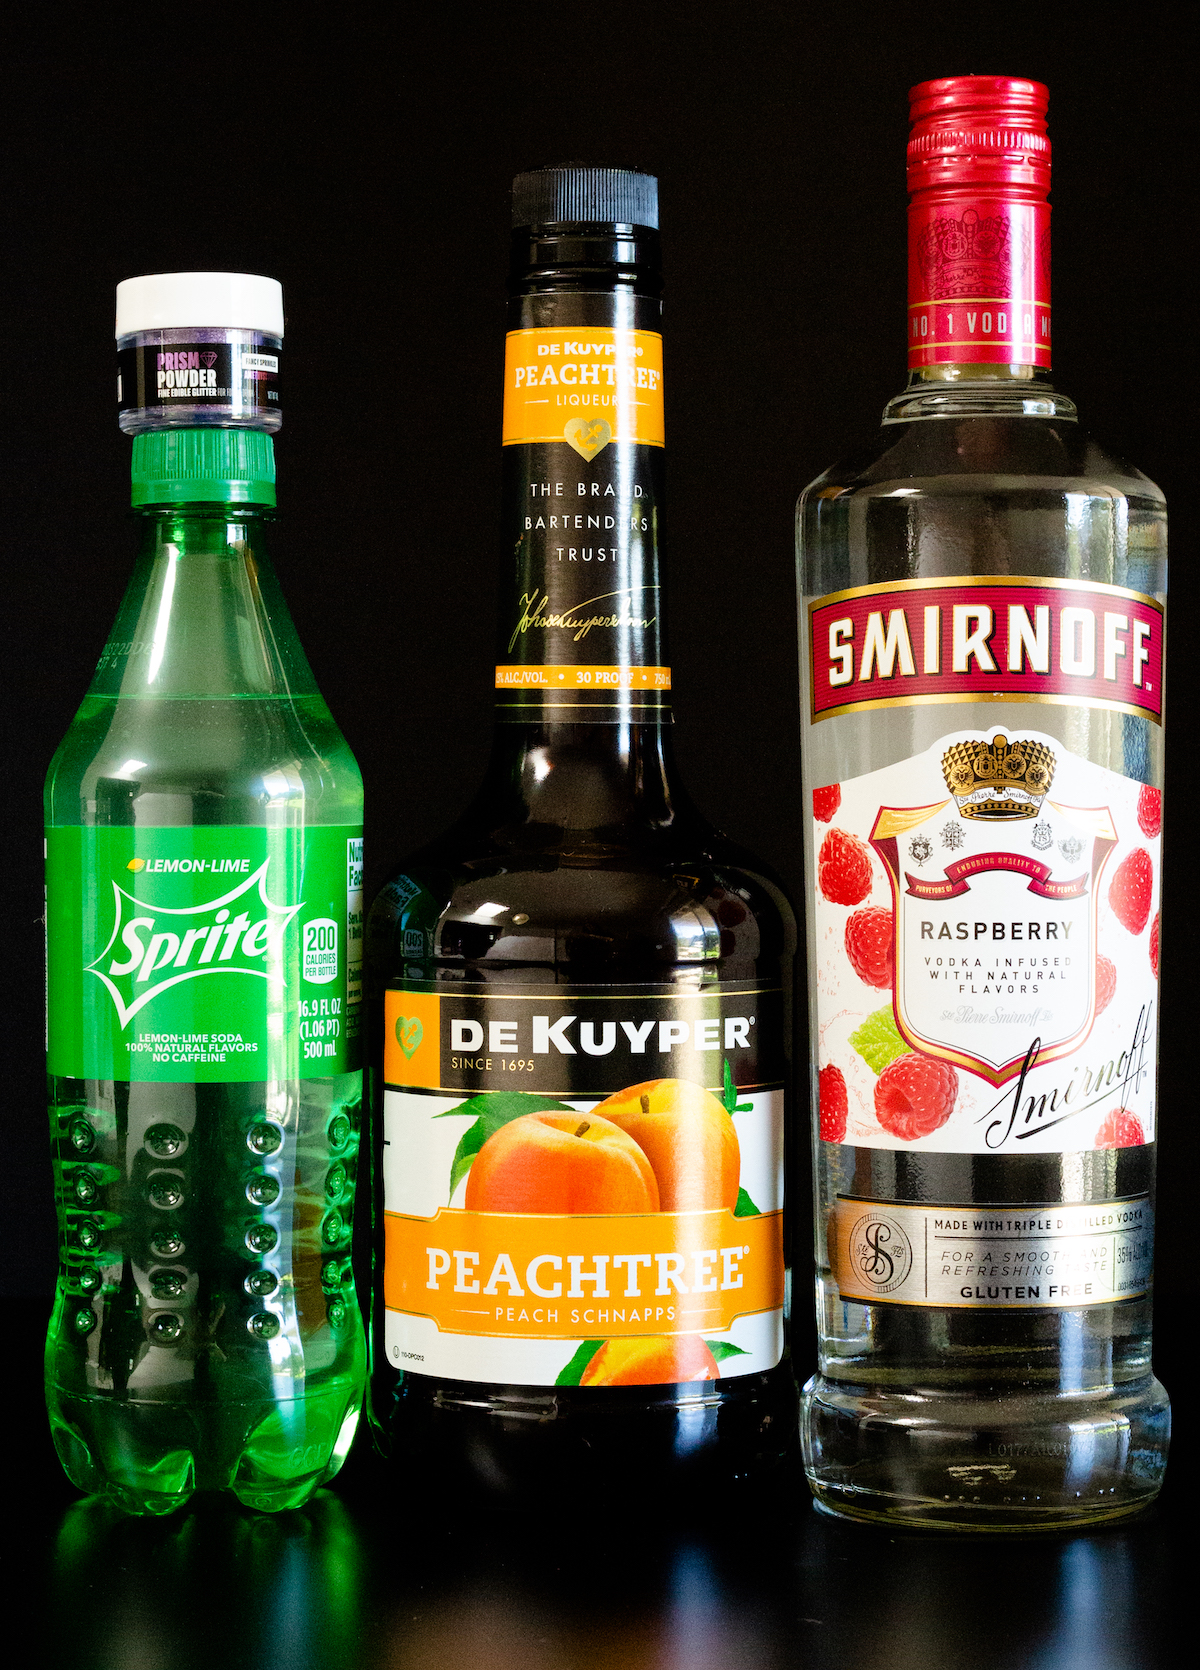 A bottle of Sprite, a small jar of purple prism powder, a bottle of peach liqueur, and a bottle of raspberry vodka sit on a black background.